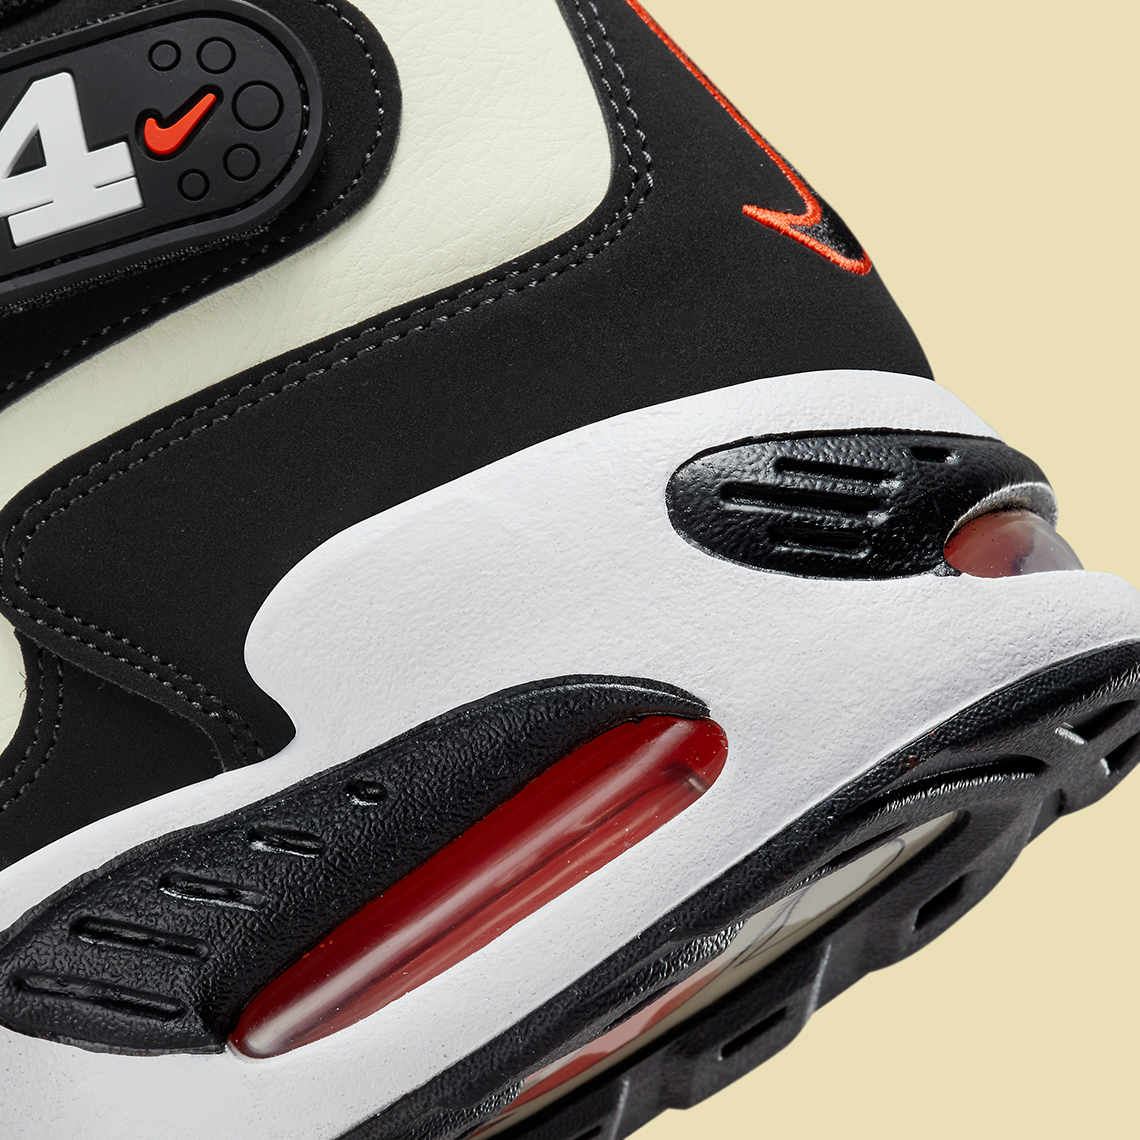 Nike Air Griffey Max 1 USA DX3723-100 DX3724-100 Release Date